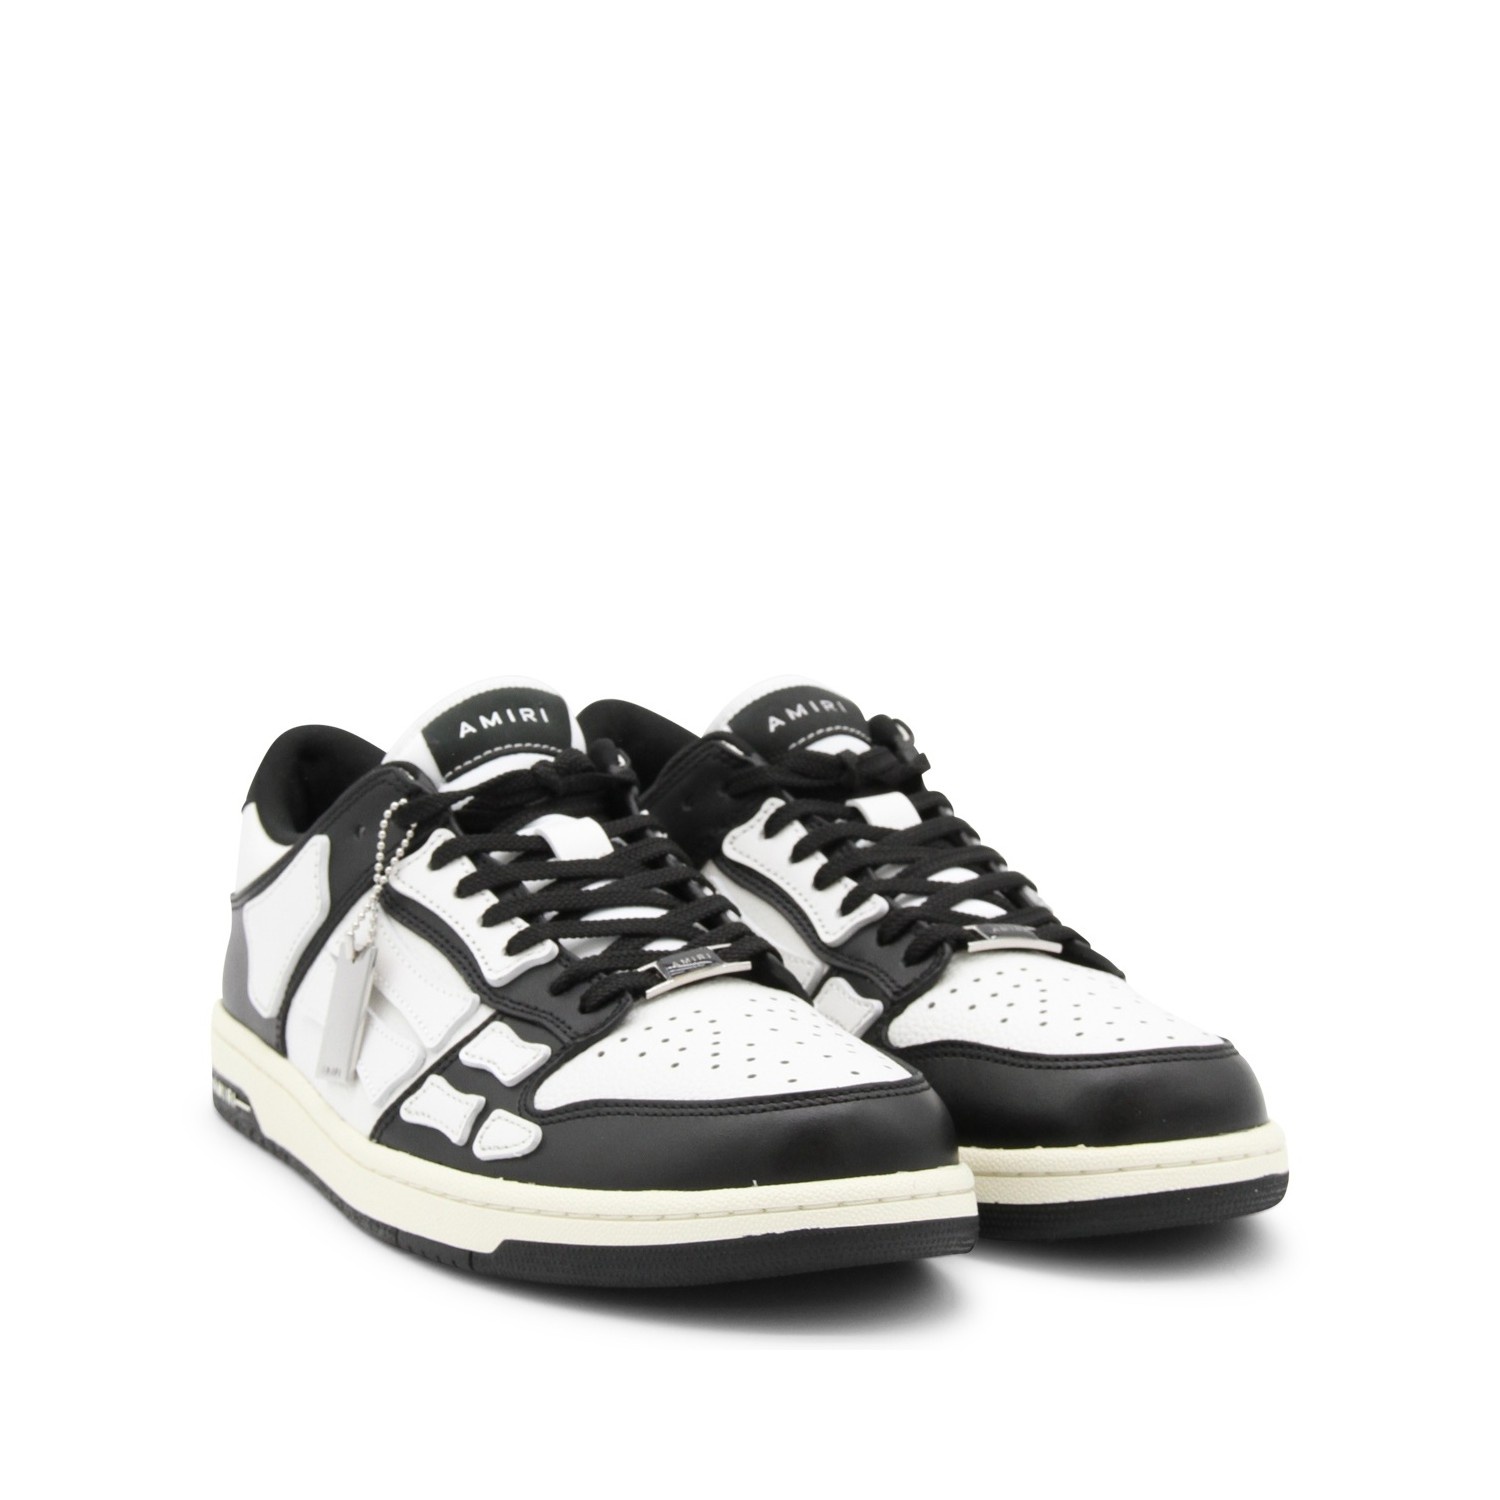 BLACK AND WHITE LEATHER SKEL SNEAKERS - 2